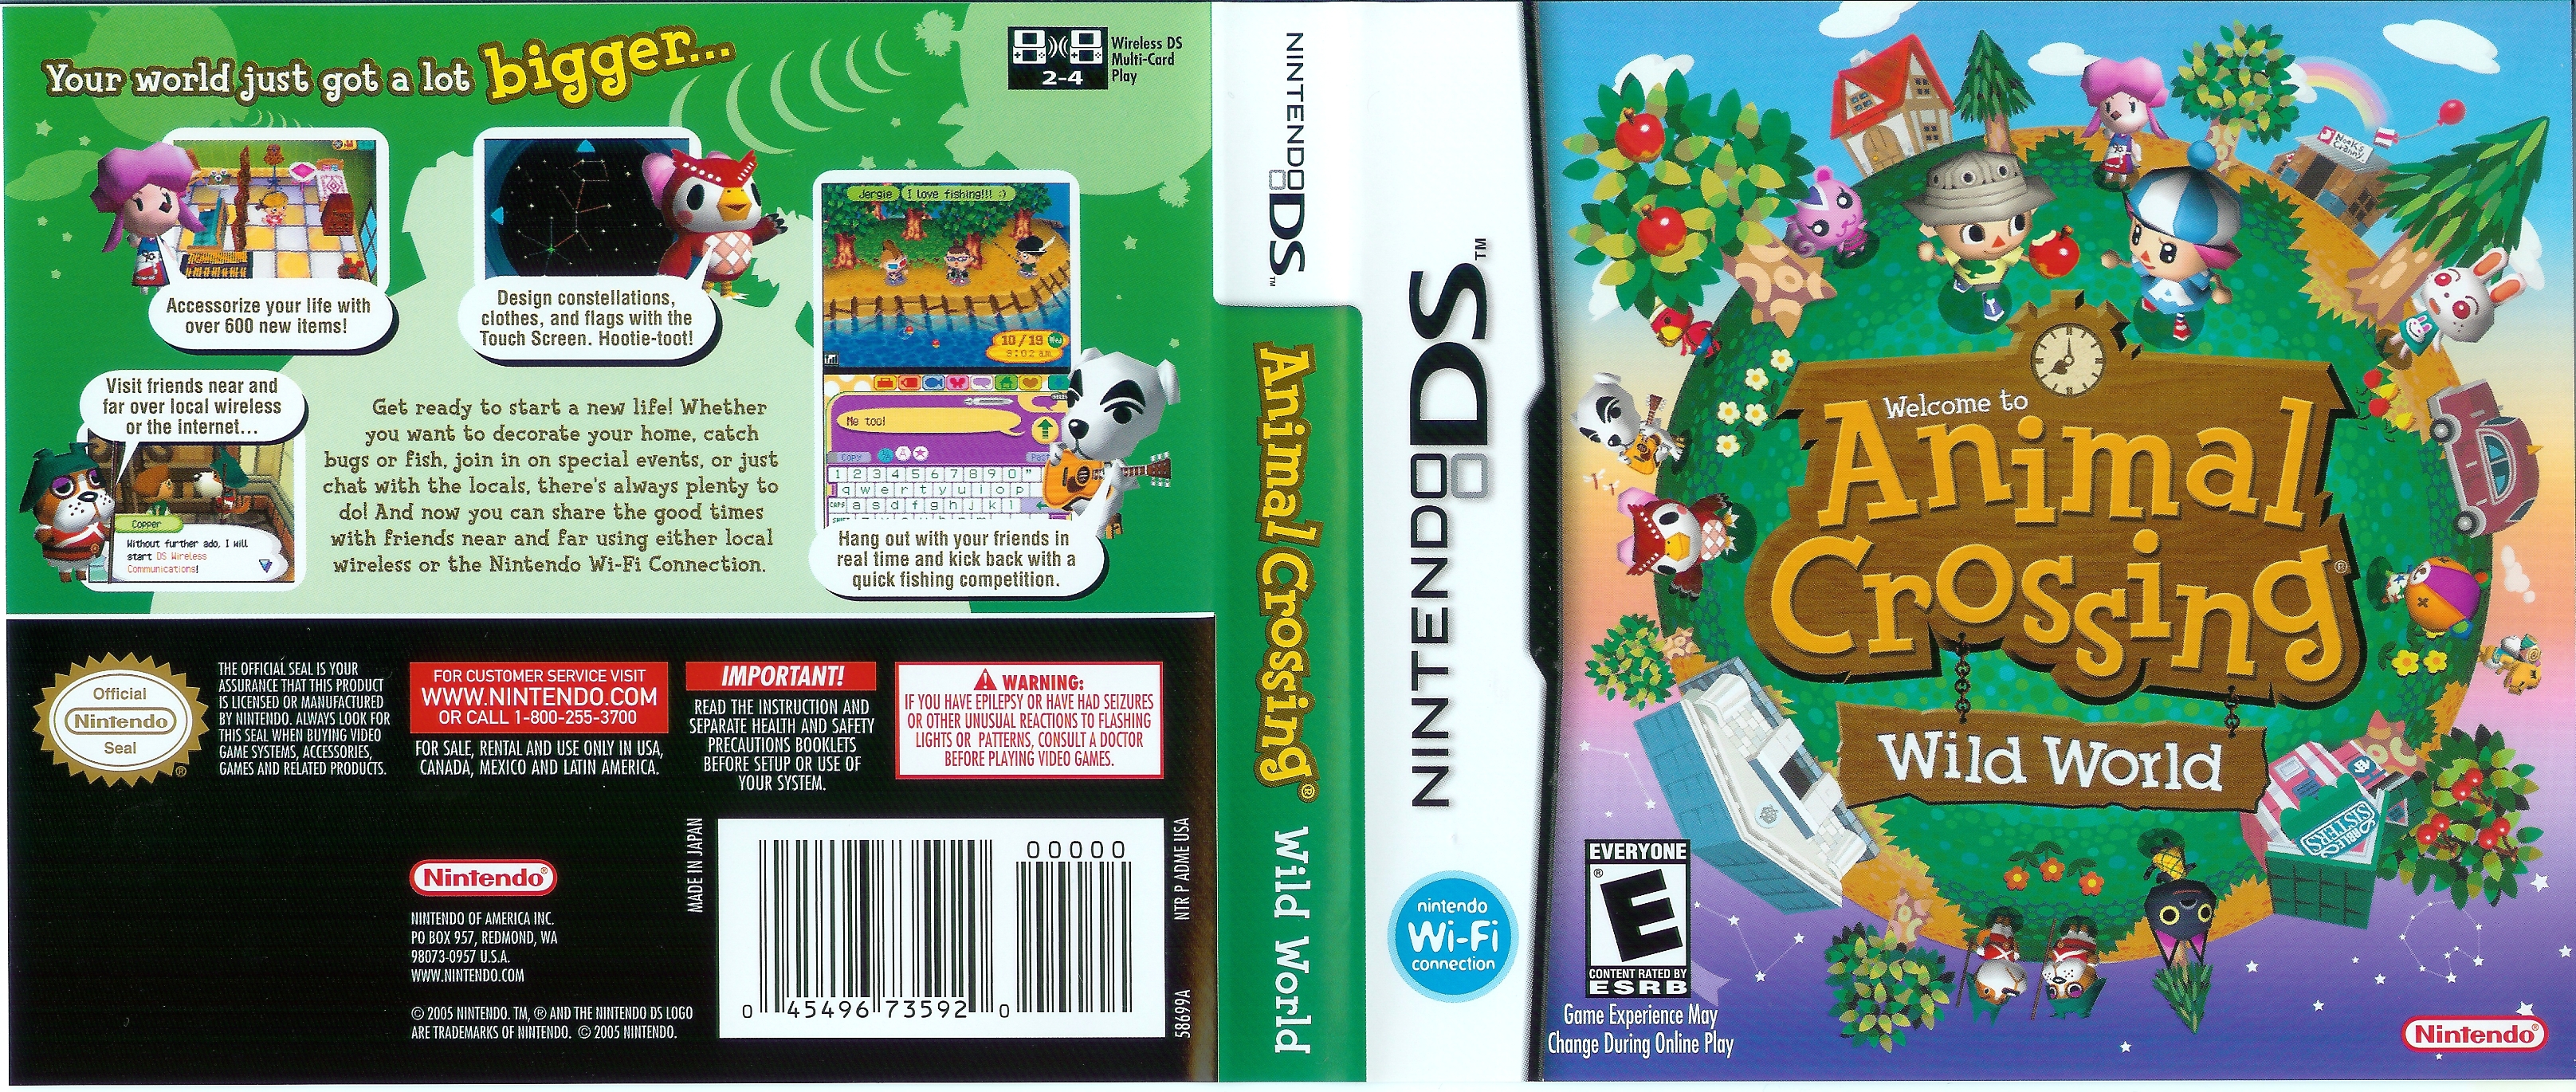 Animal Crossing Wild World Nintendo Ds Covers Cover Century Over 500 000 Album Art Covers For Free